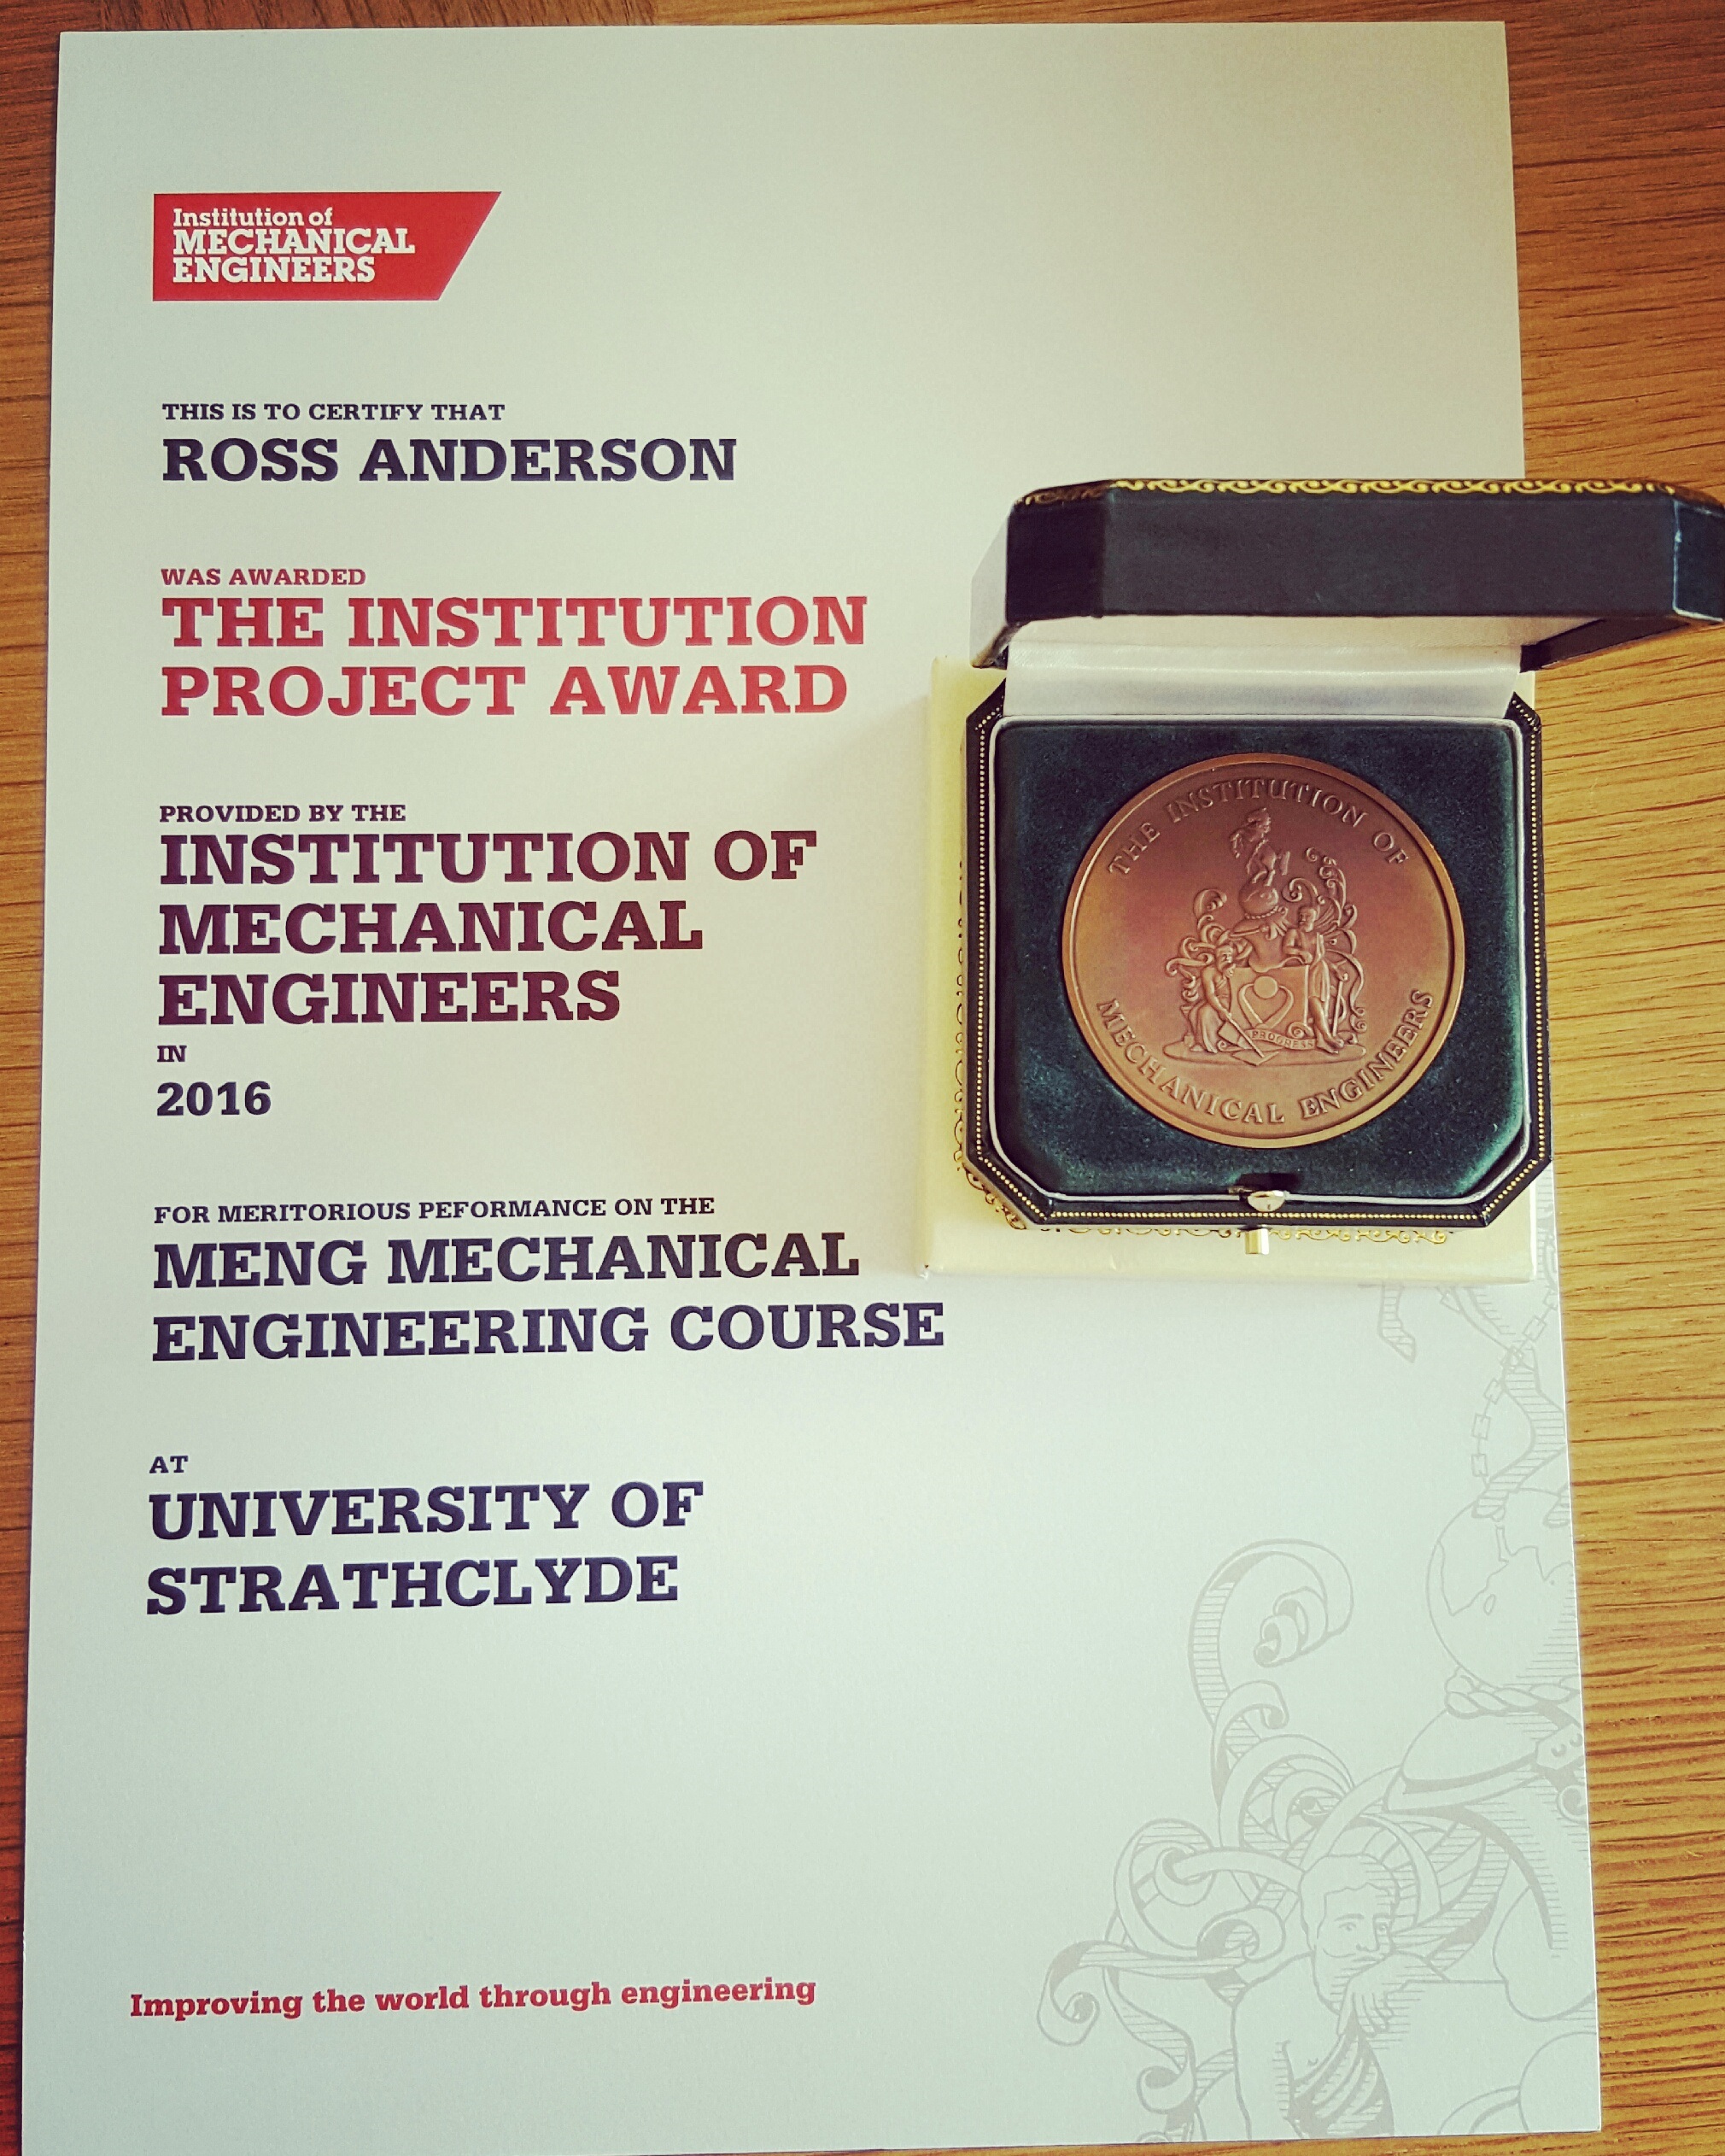 Image of Ross Anderson's award certificate for best 4th year project